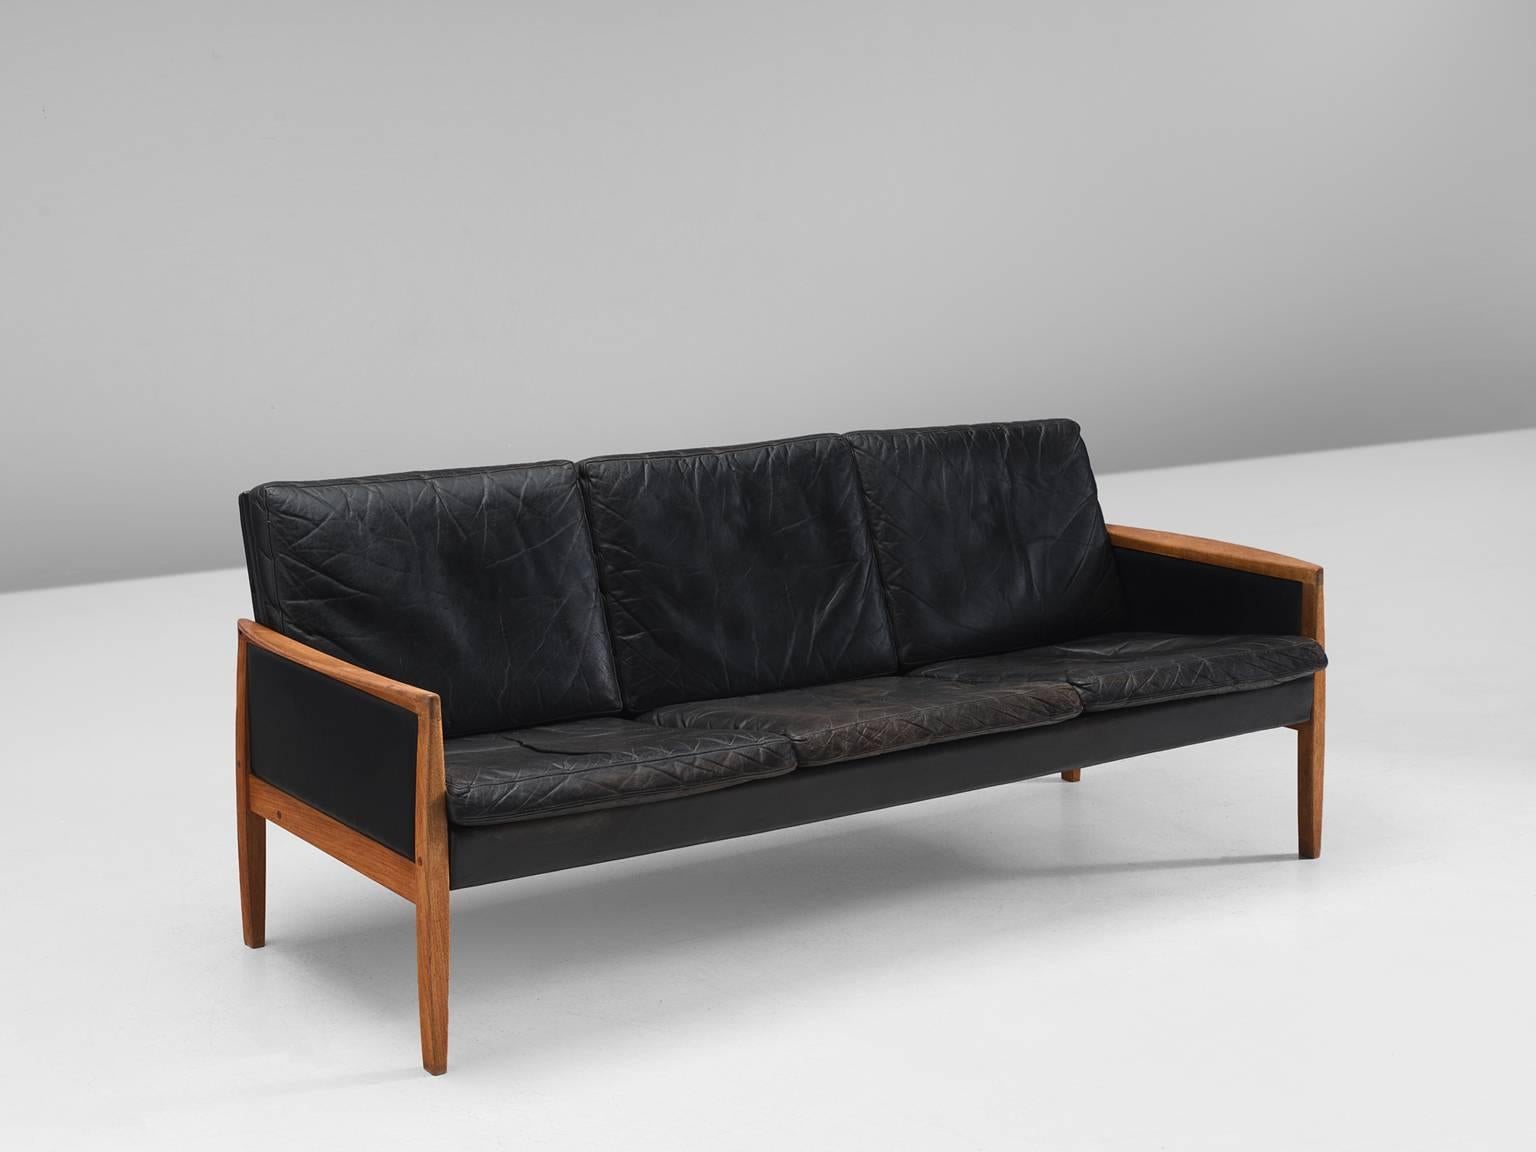 Hans Olsen for Brande, black leather and teak, Denmark, circa 1960

This leather three-seat sofa is designed by the Dane Hans Olsen for Brande. The sofa is executed in black leather that has patinated due to age. The sofa has a clean, modest